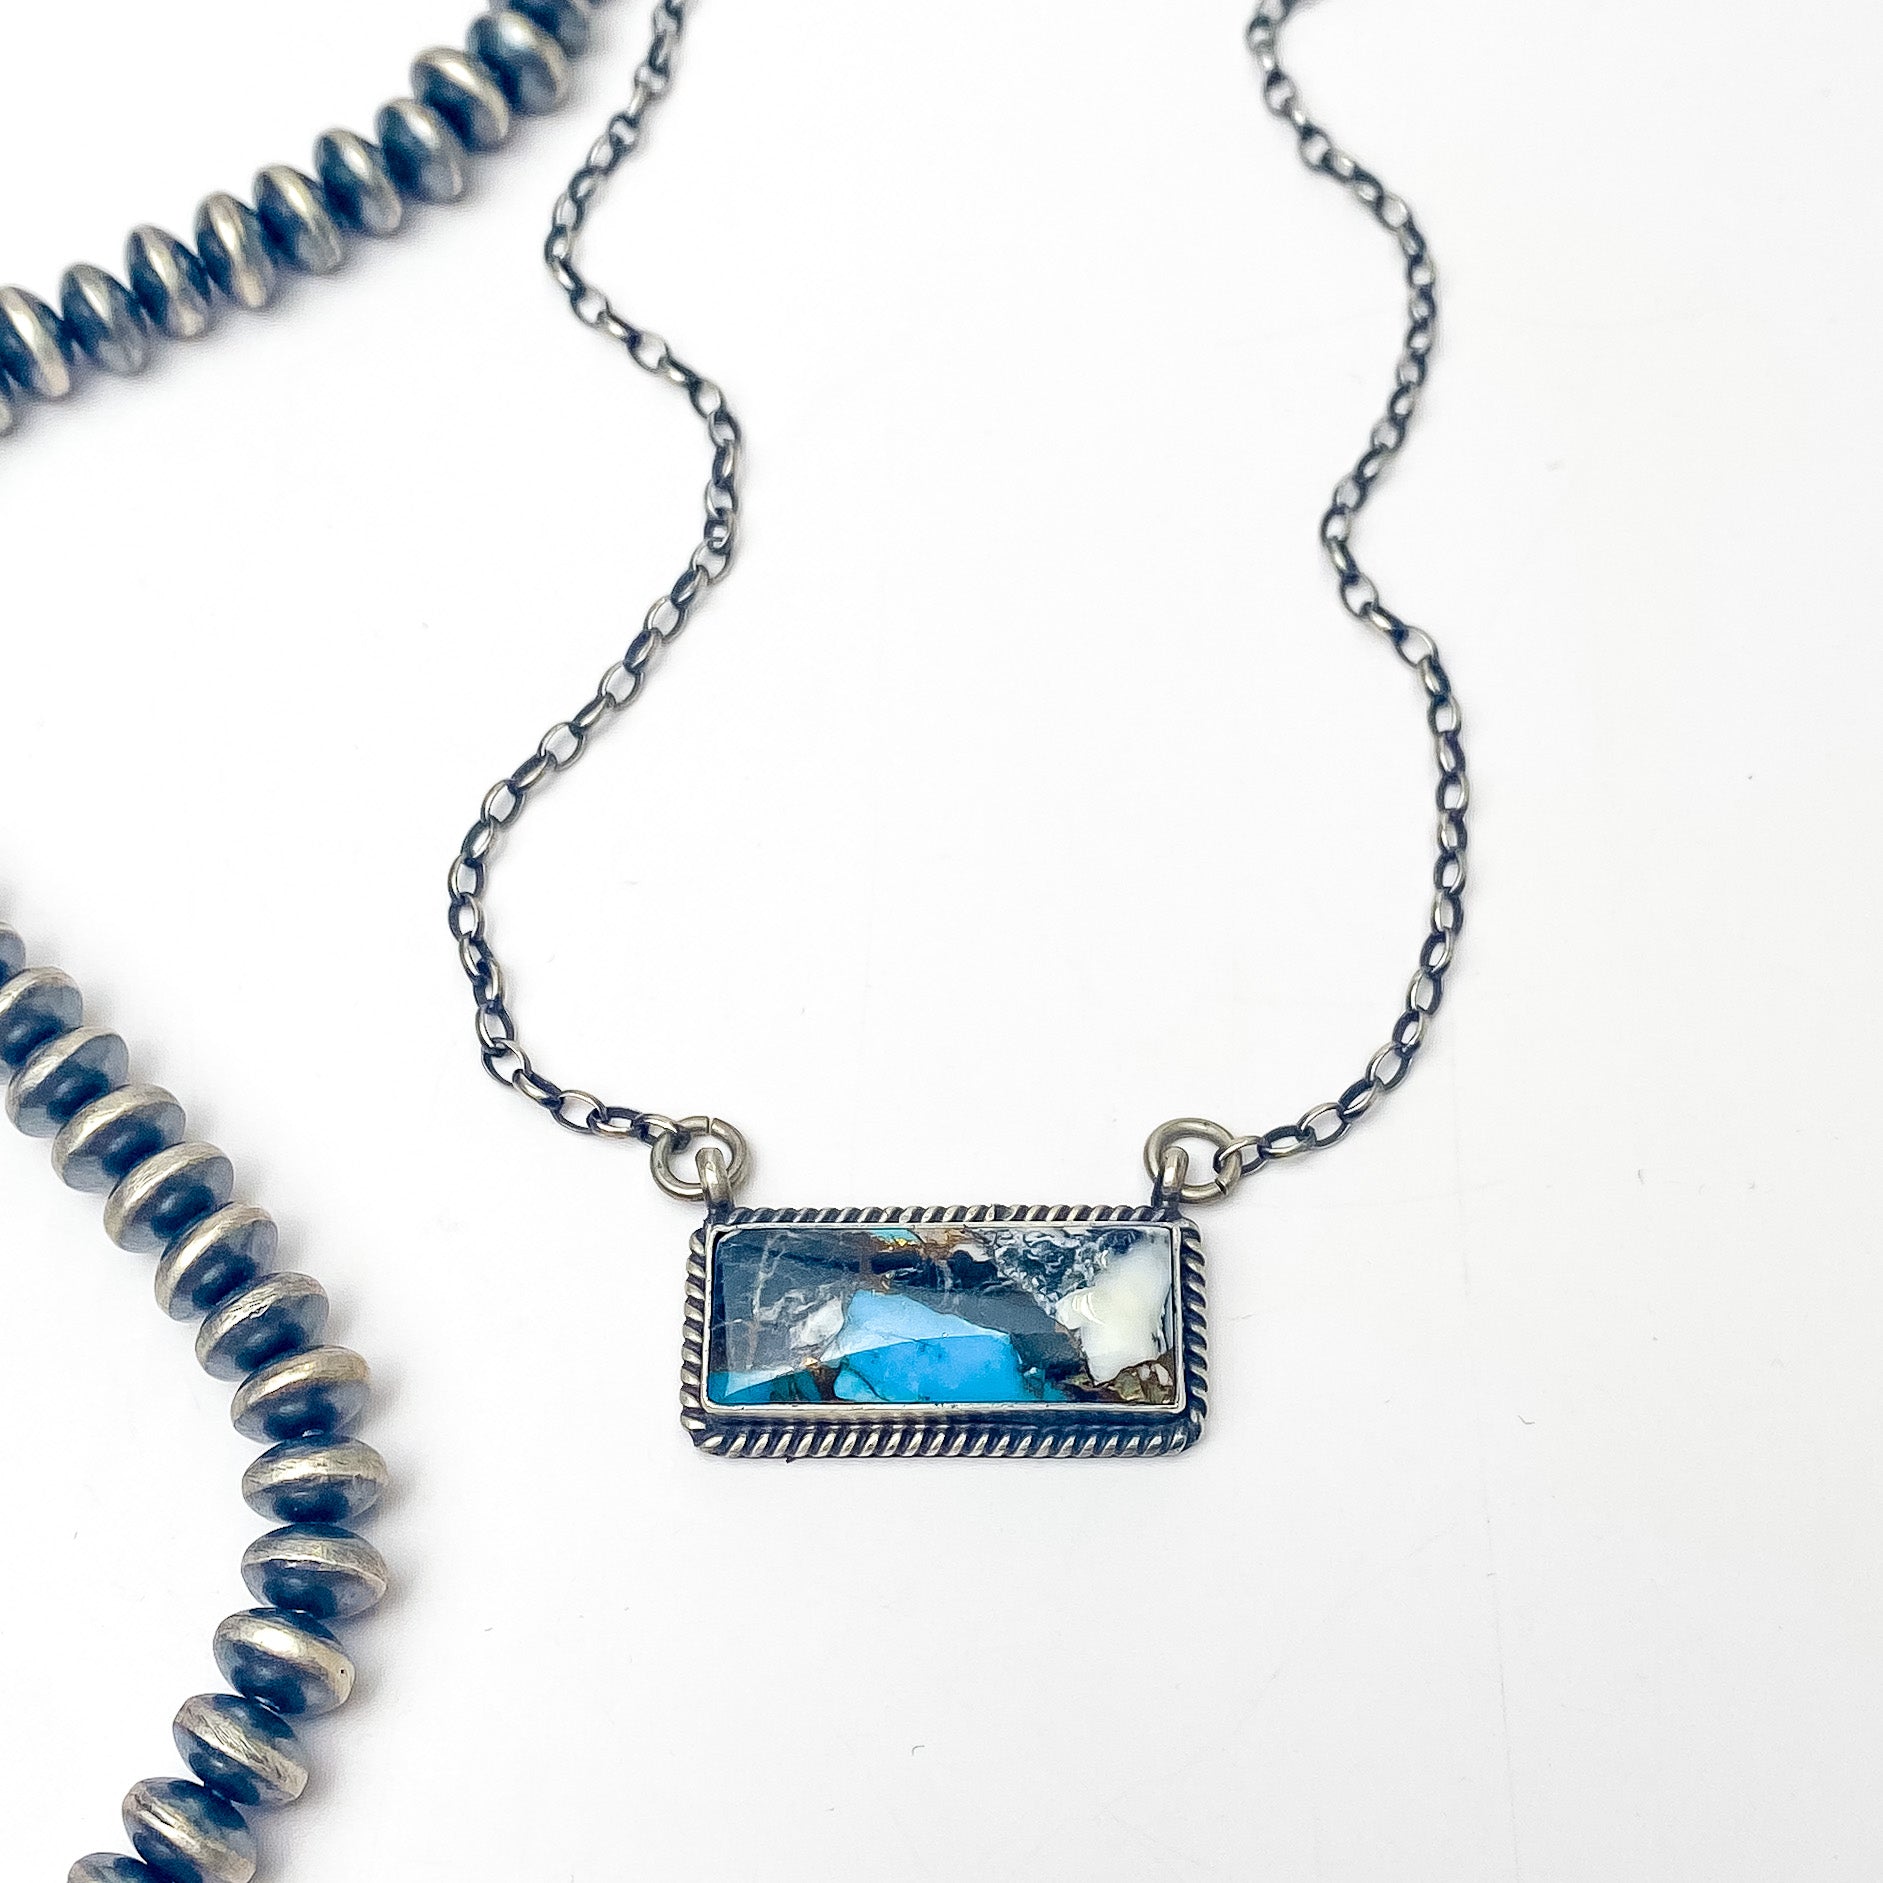 Pictured is a silver chain necklace with a silver bar pendant and a white buffalo and turquoise remix stone. This necklace is pictured on a white background with silver beads on the left side. 